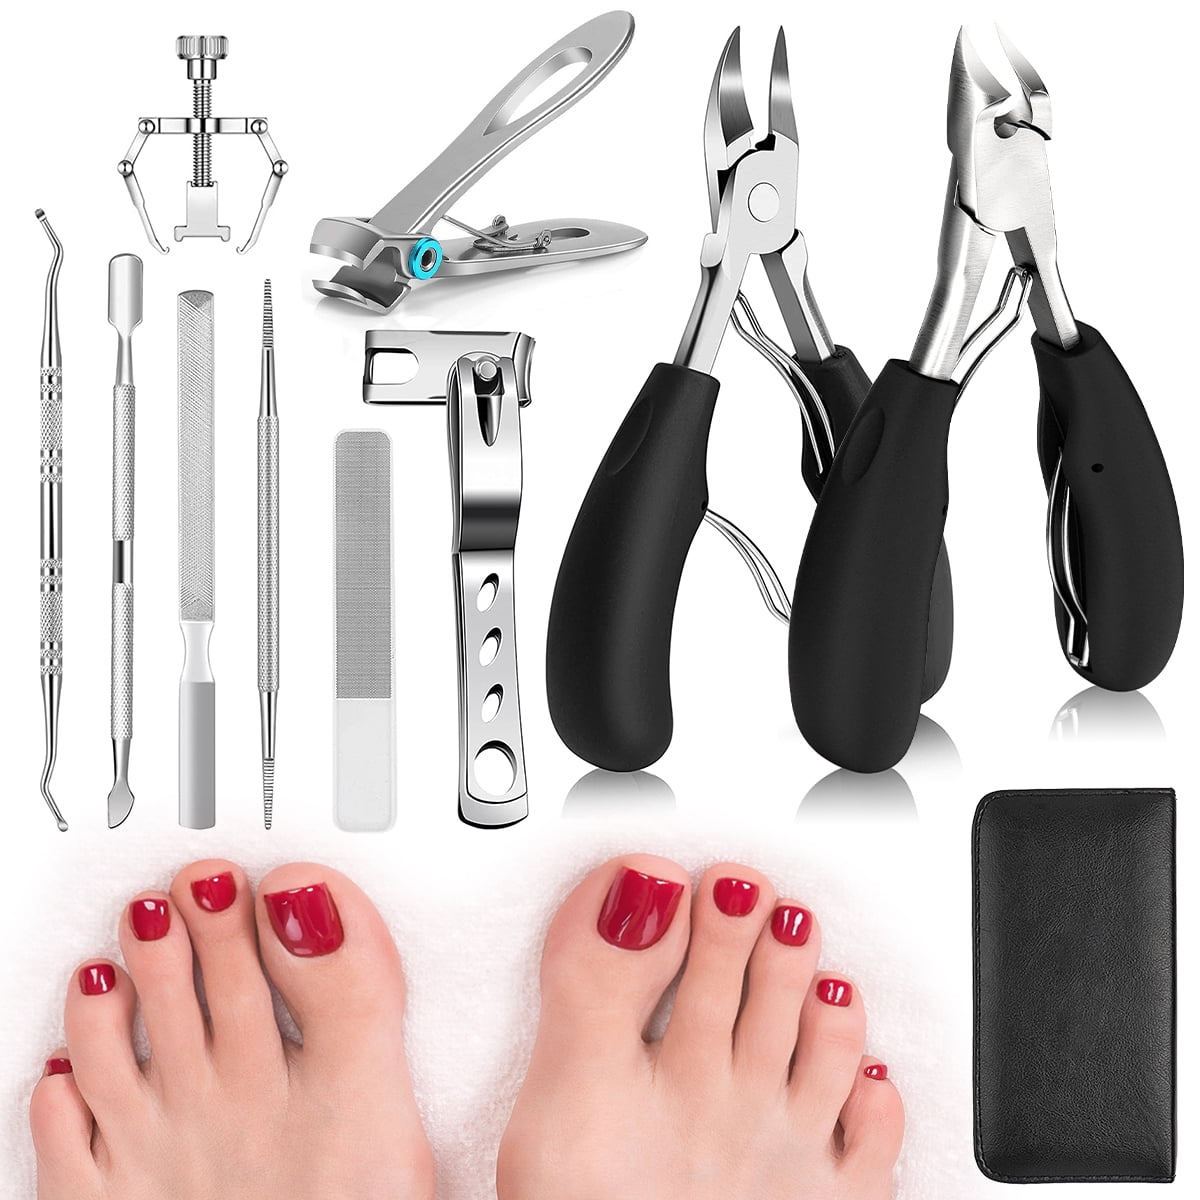 Amgra Podiatrist Toenail Clippers, Professional Thick & Ingrown Toe Nail Clippers for Men & Seniors, Pedicure Clippers Toenail Cutters, Super Sharp